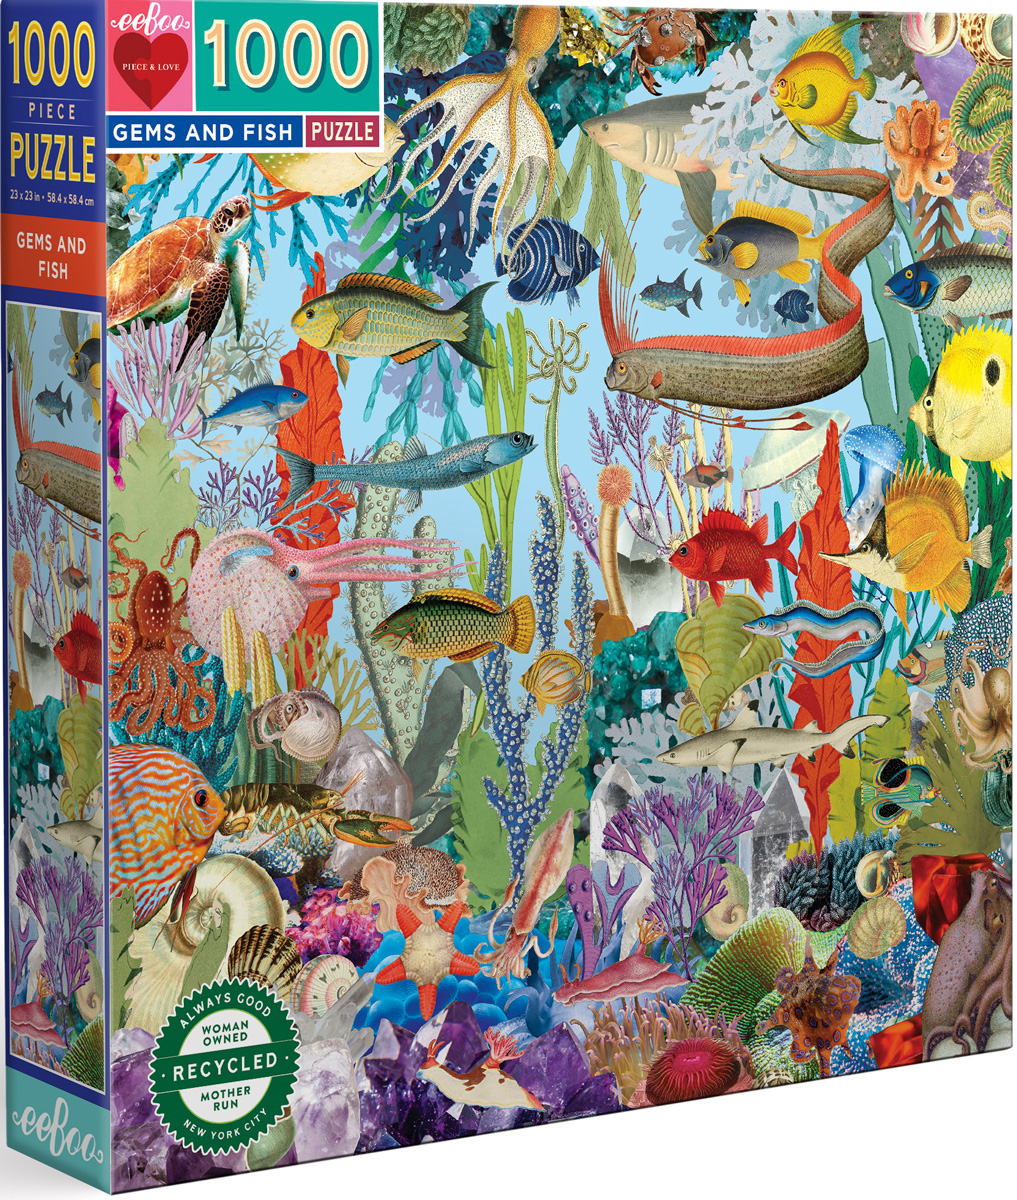 Gems and Fish Sea Life Jigsaw Puzzle